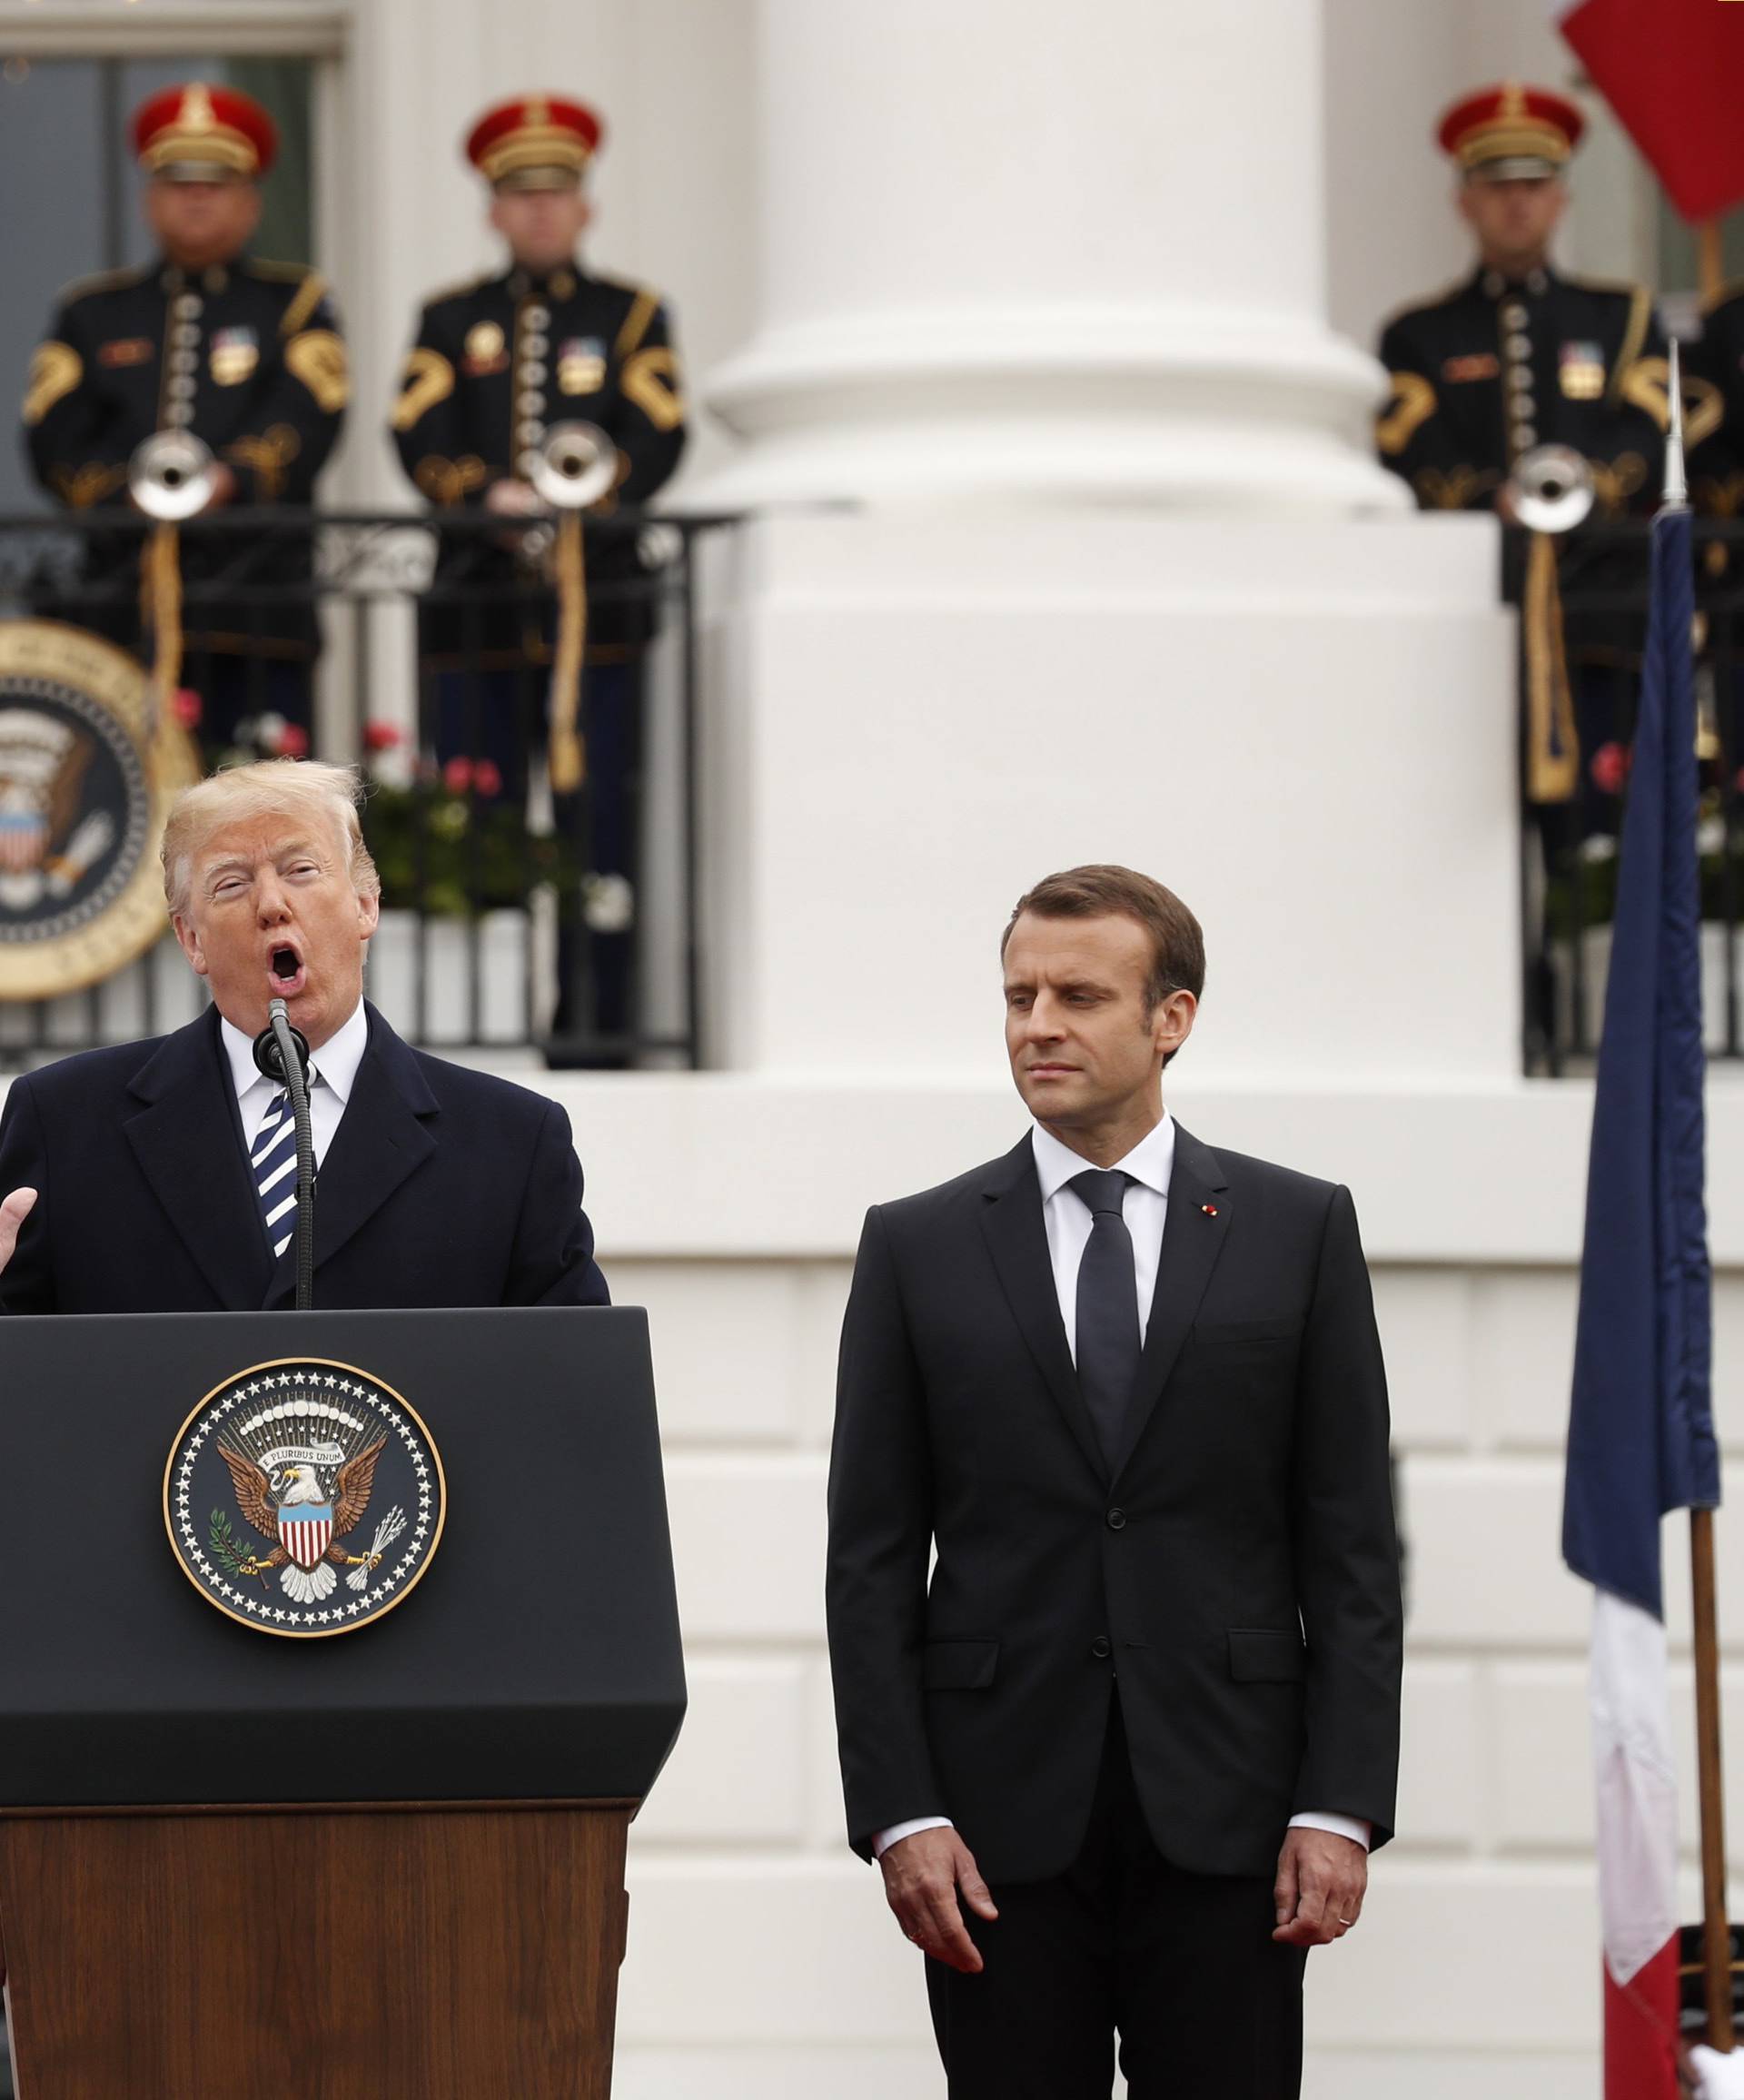 U.S. President Trump welcomes French President Macron during arrival ceremony at the White House in Washington